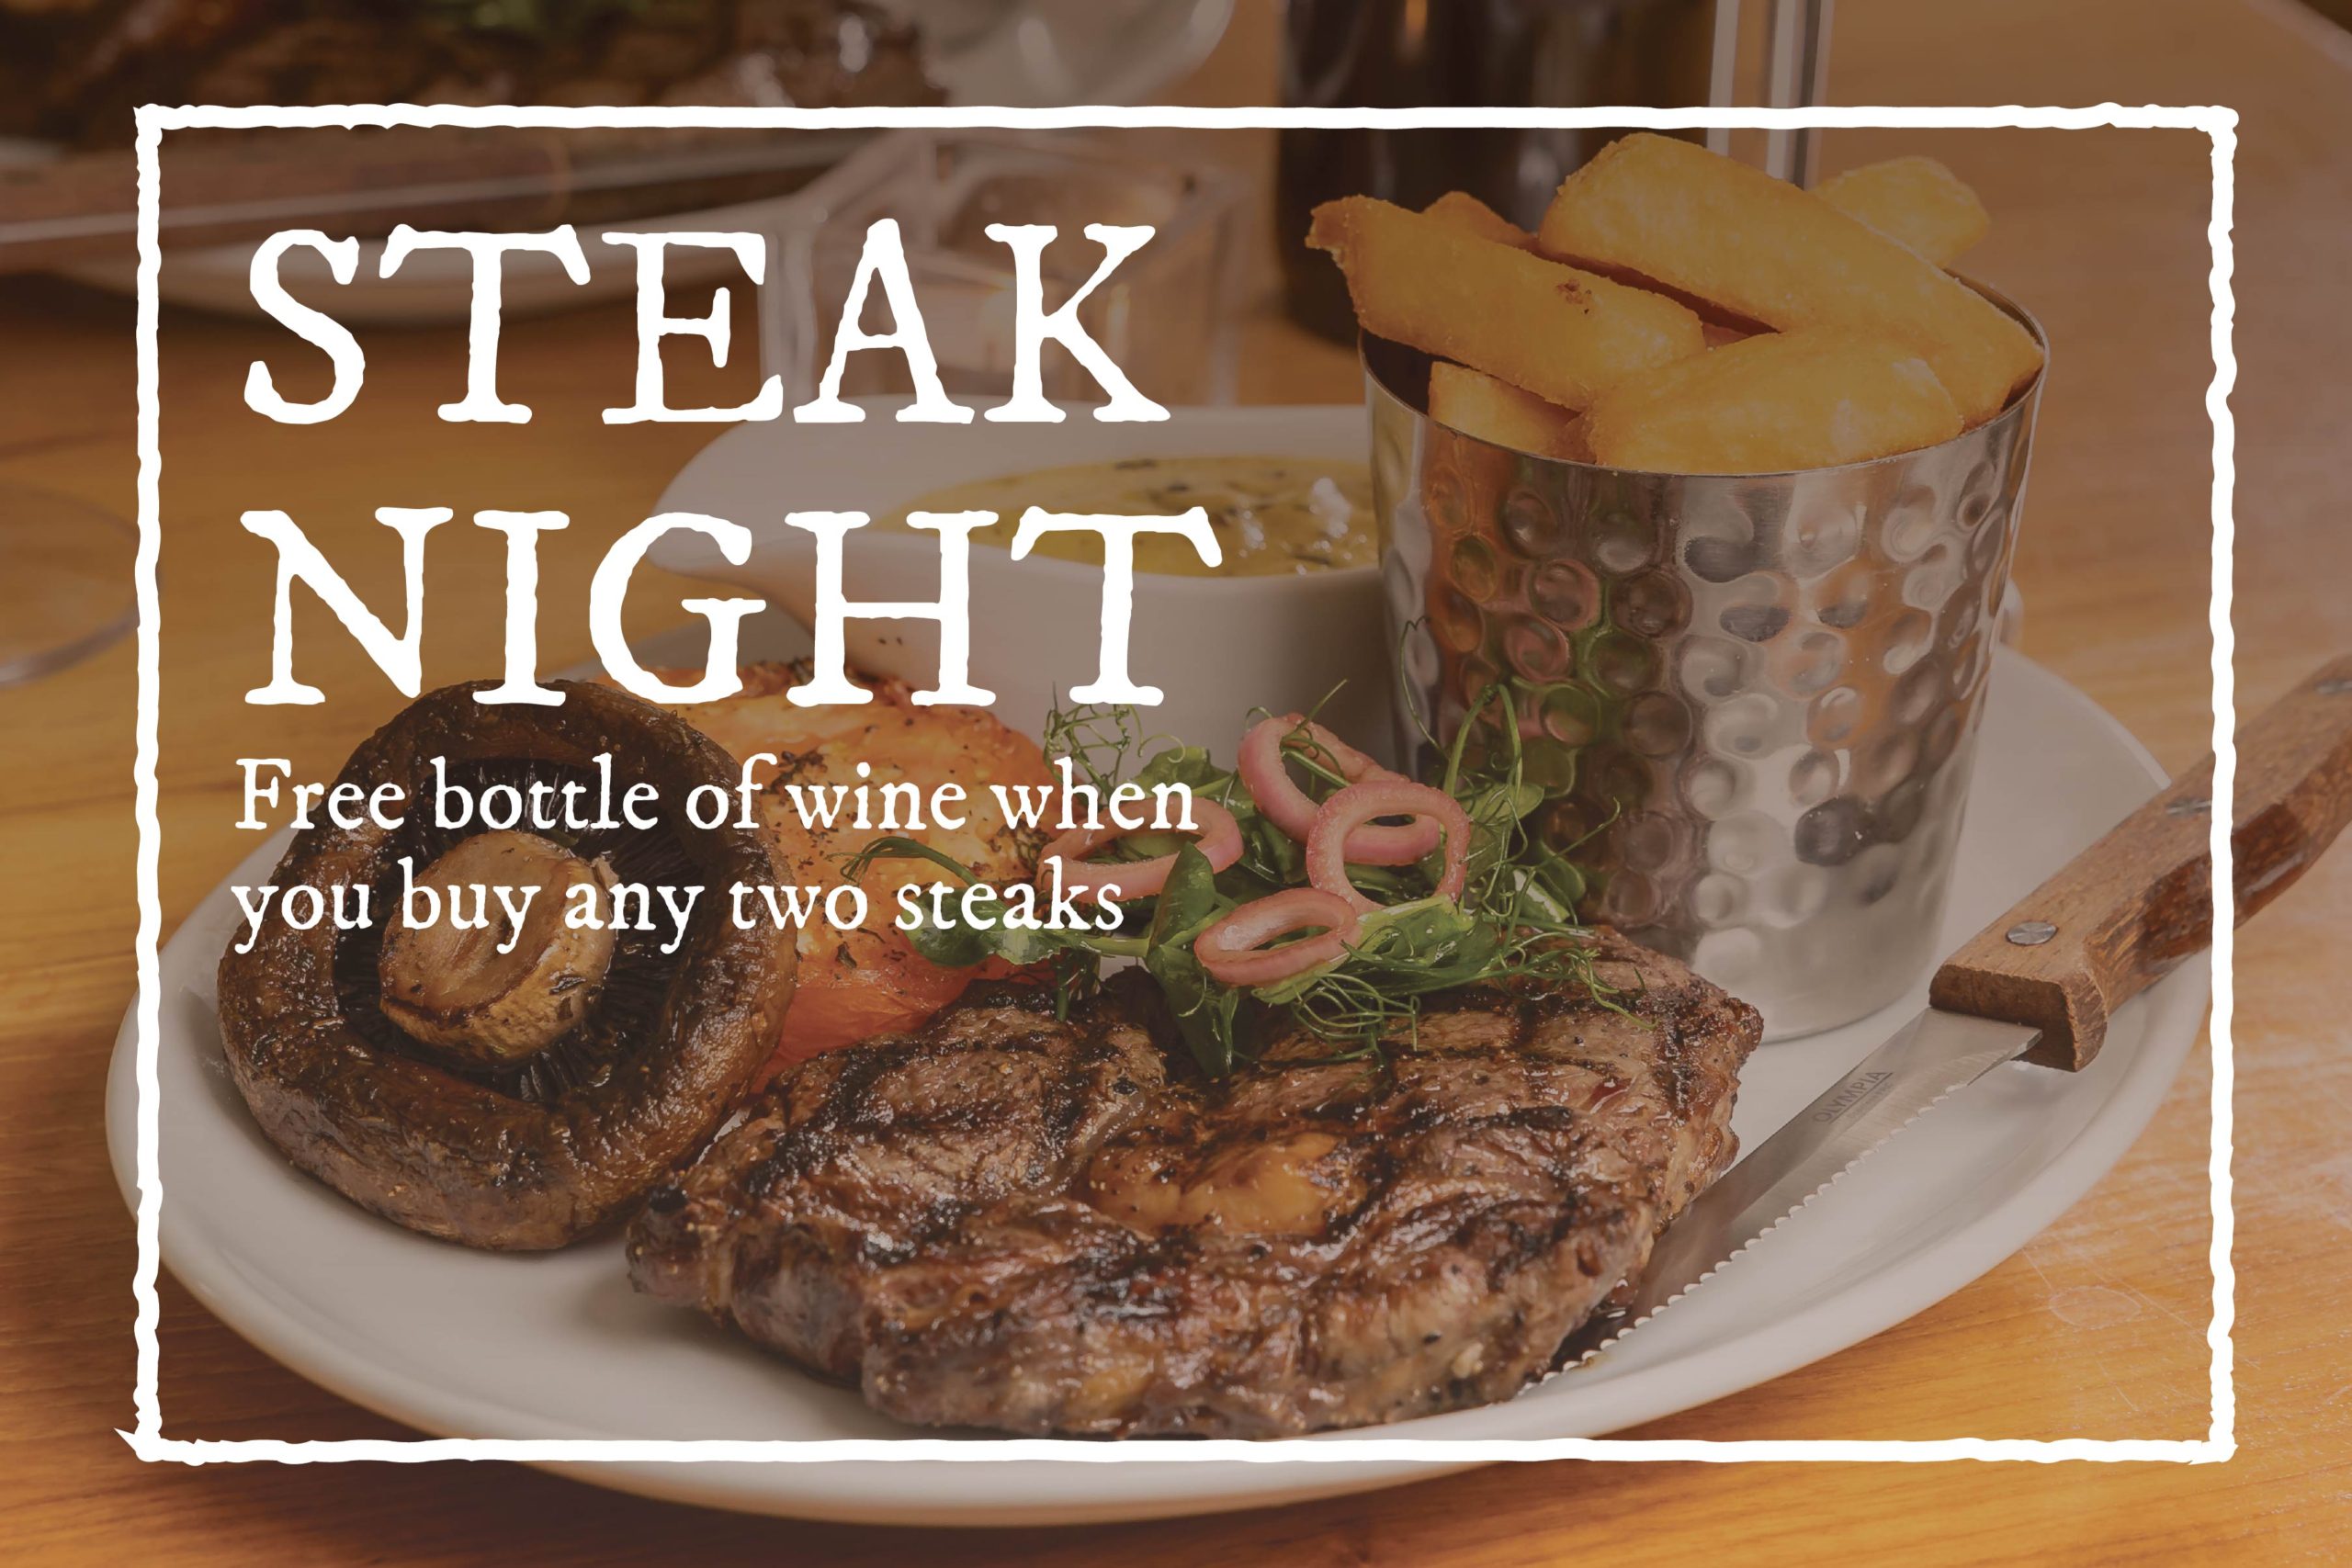 Buy 2 steaks and receive a free bottle of wine.